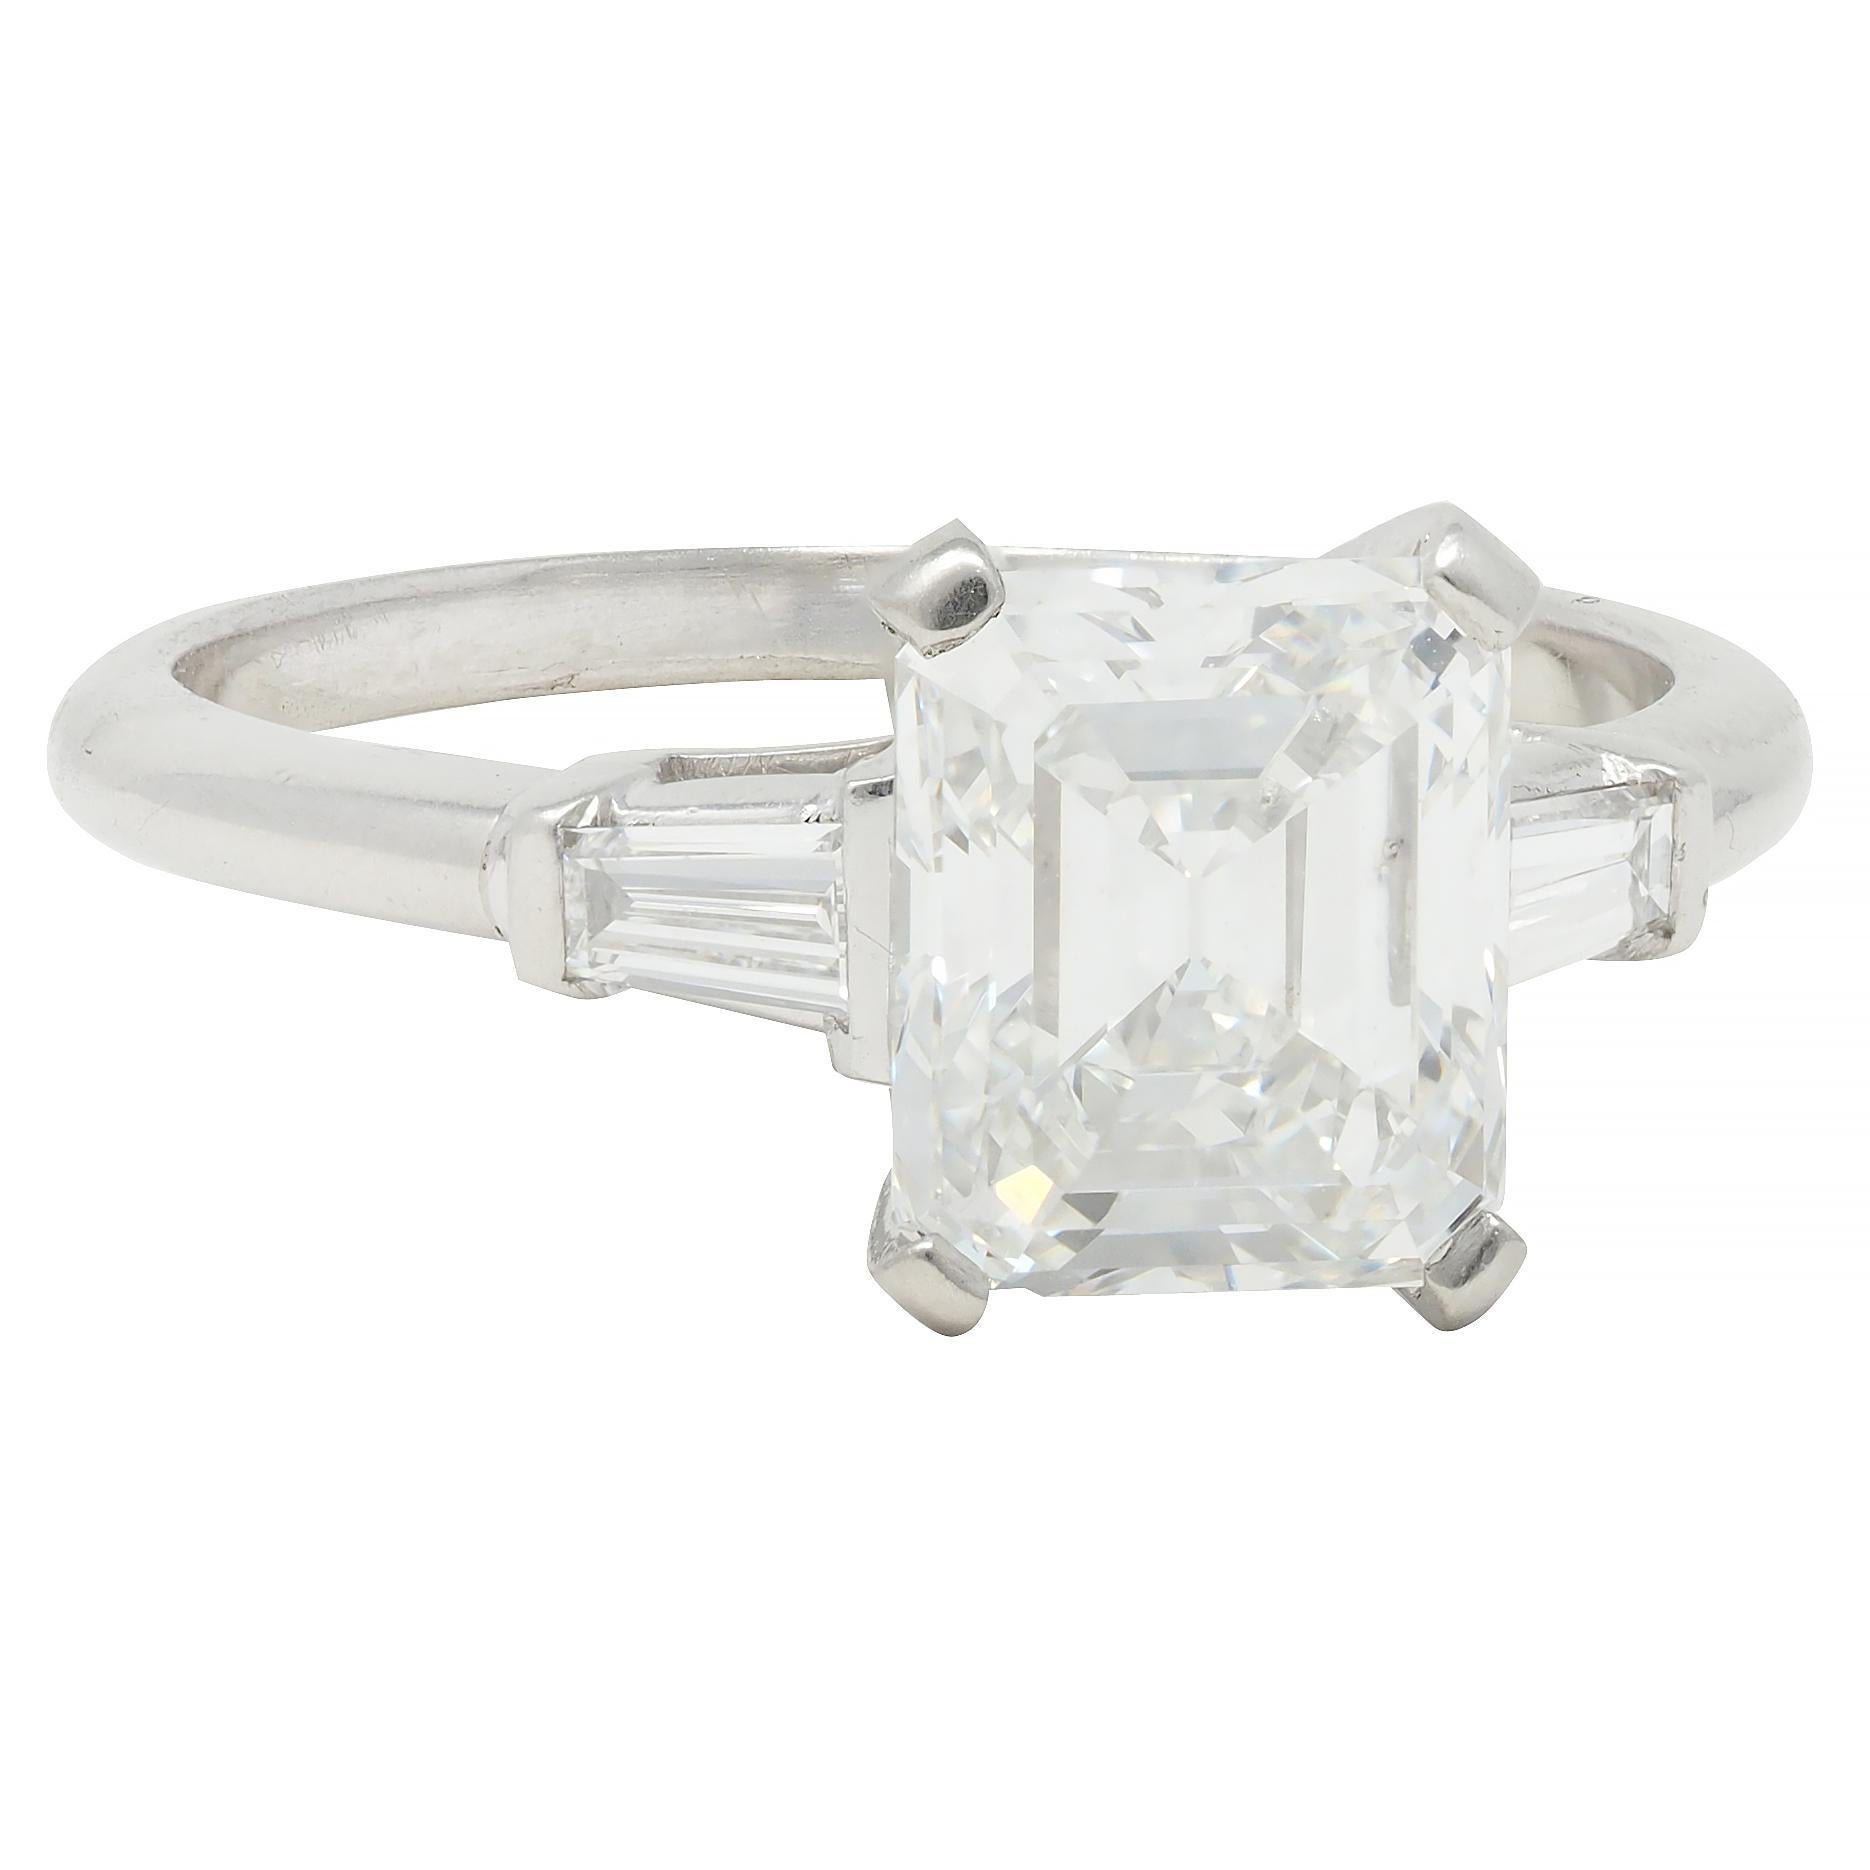 Centering an emerald cut diamond weighing 2.03 carats - F color with VVS2 clarity
Prong set in basket and flanked by tapered baguette cut diamonds 
Weighing approximately 0.14 carat total - well matched to center
Bar set in cathedral